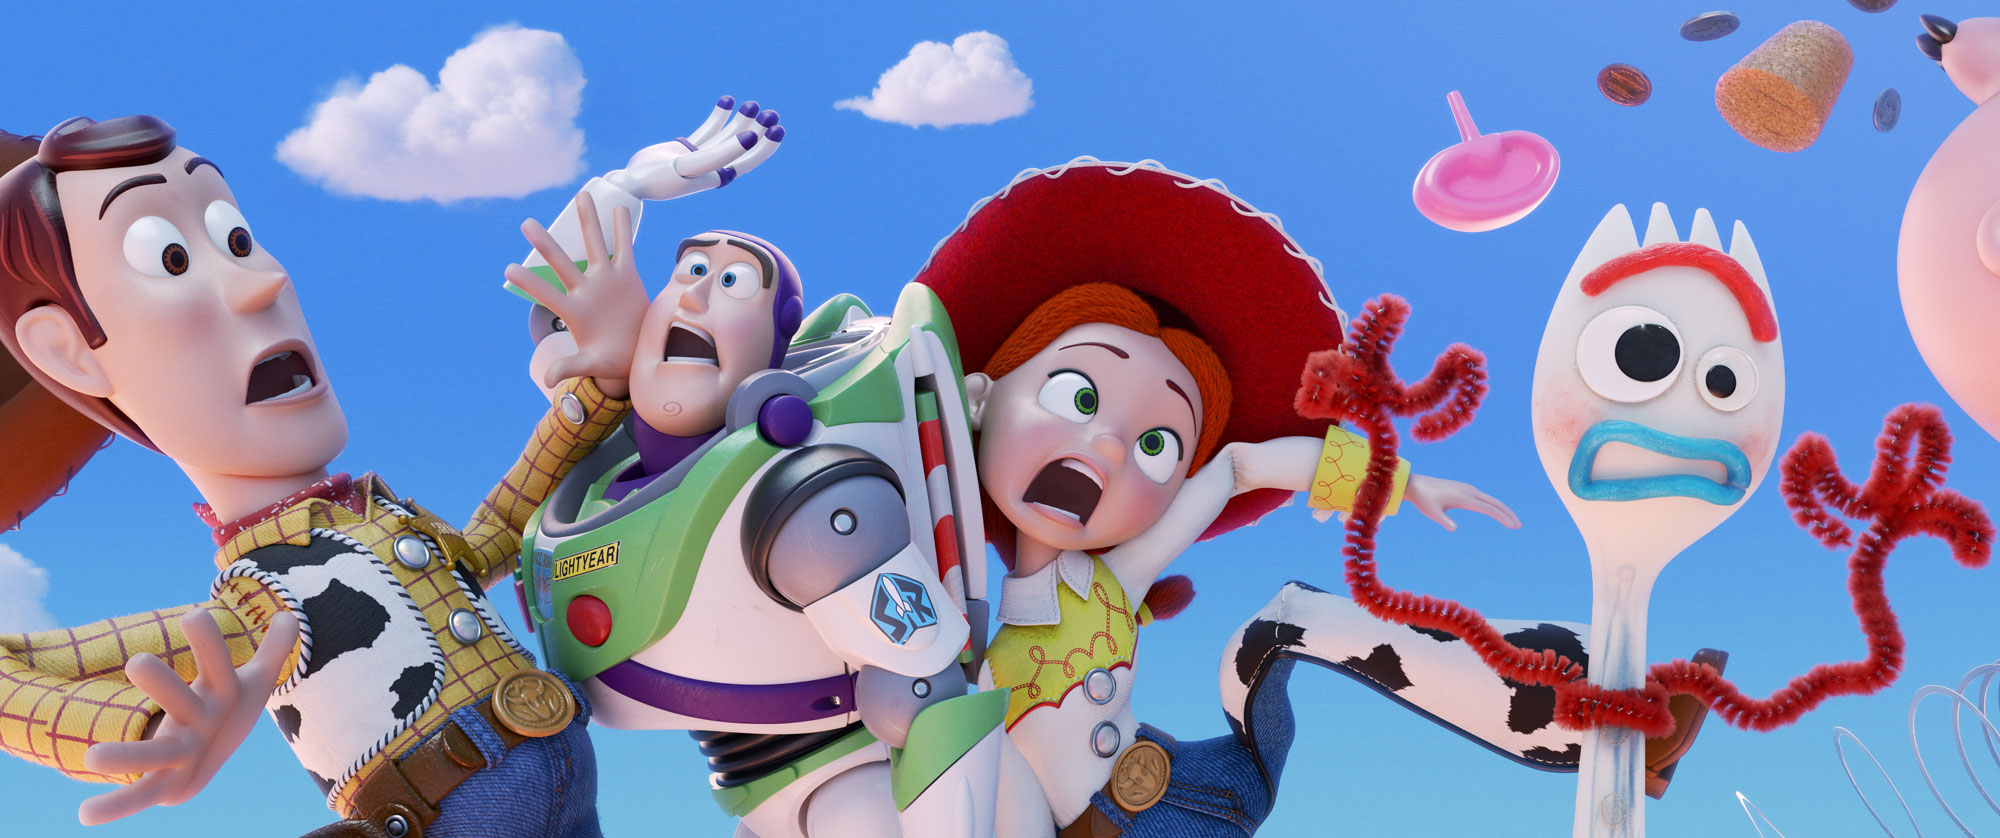 Toy Story 4 Gets All-New International Trailer with New Footage